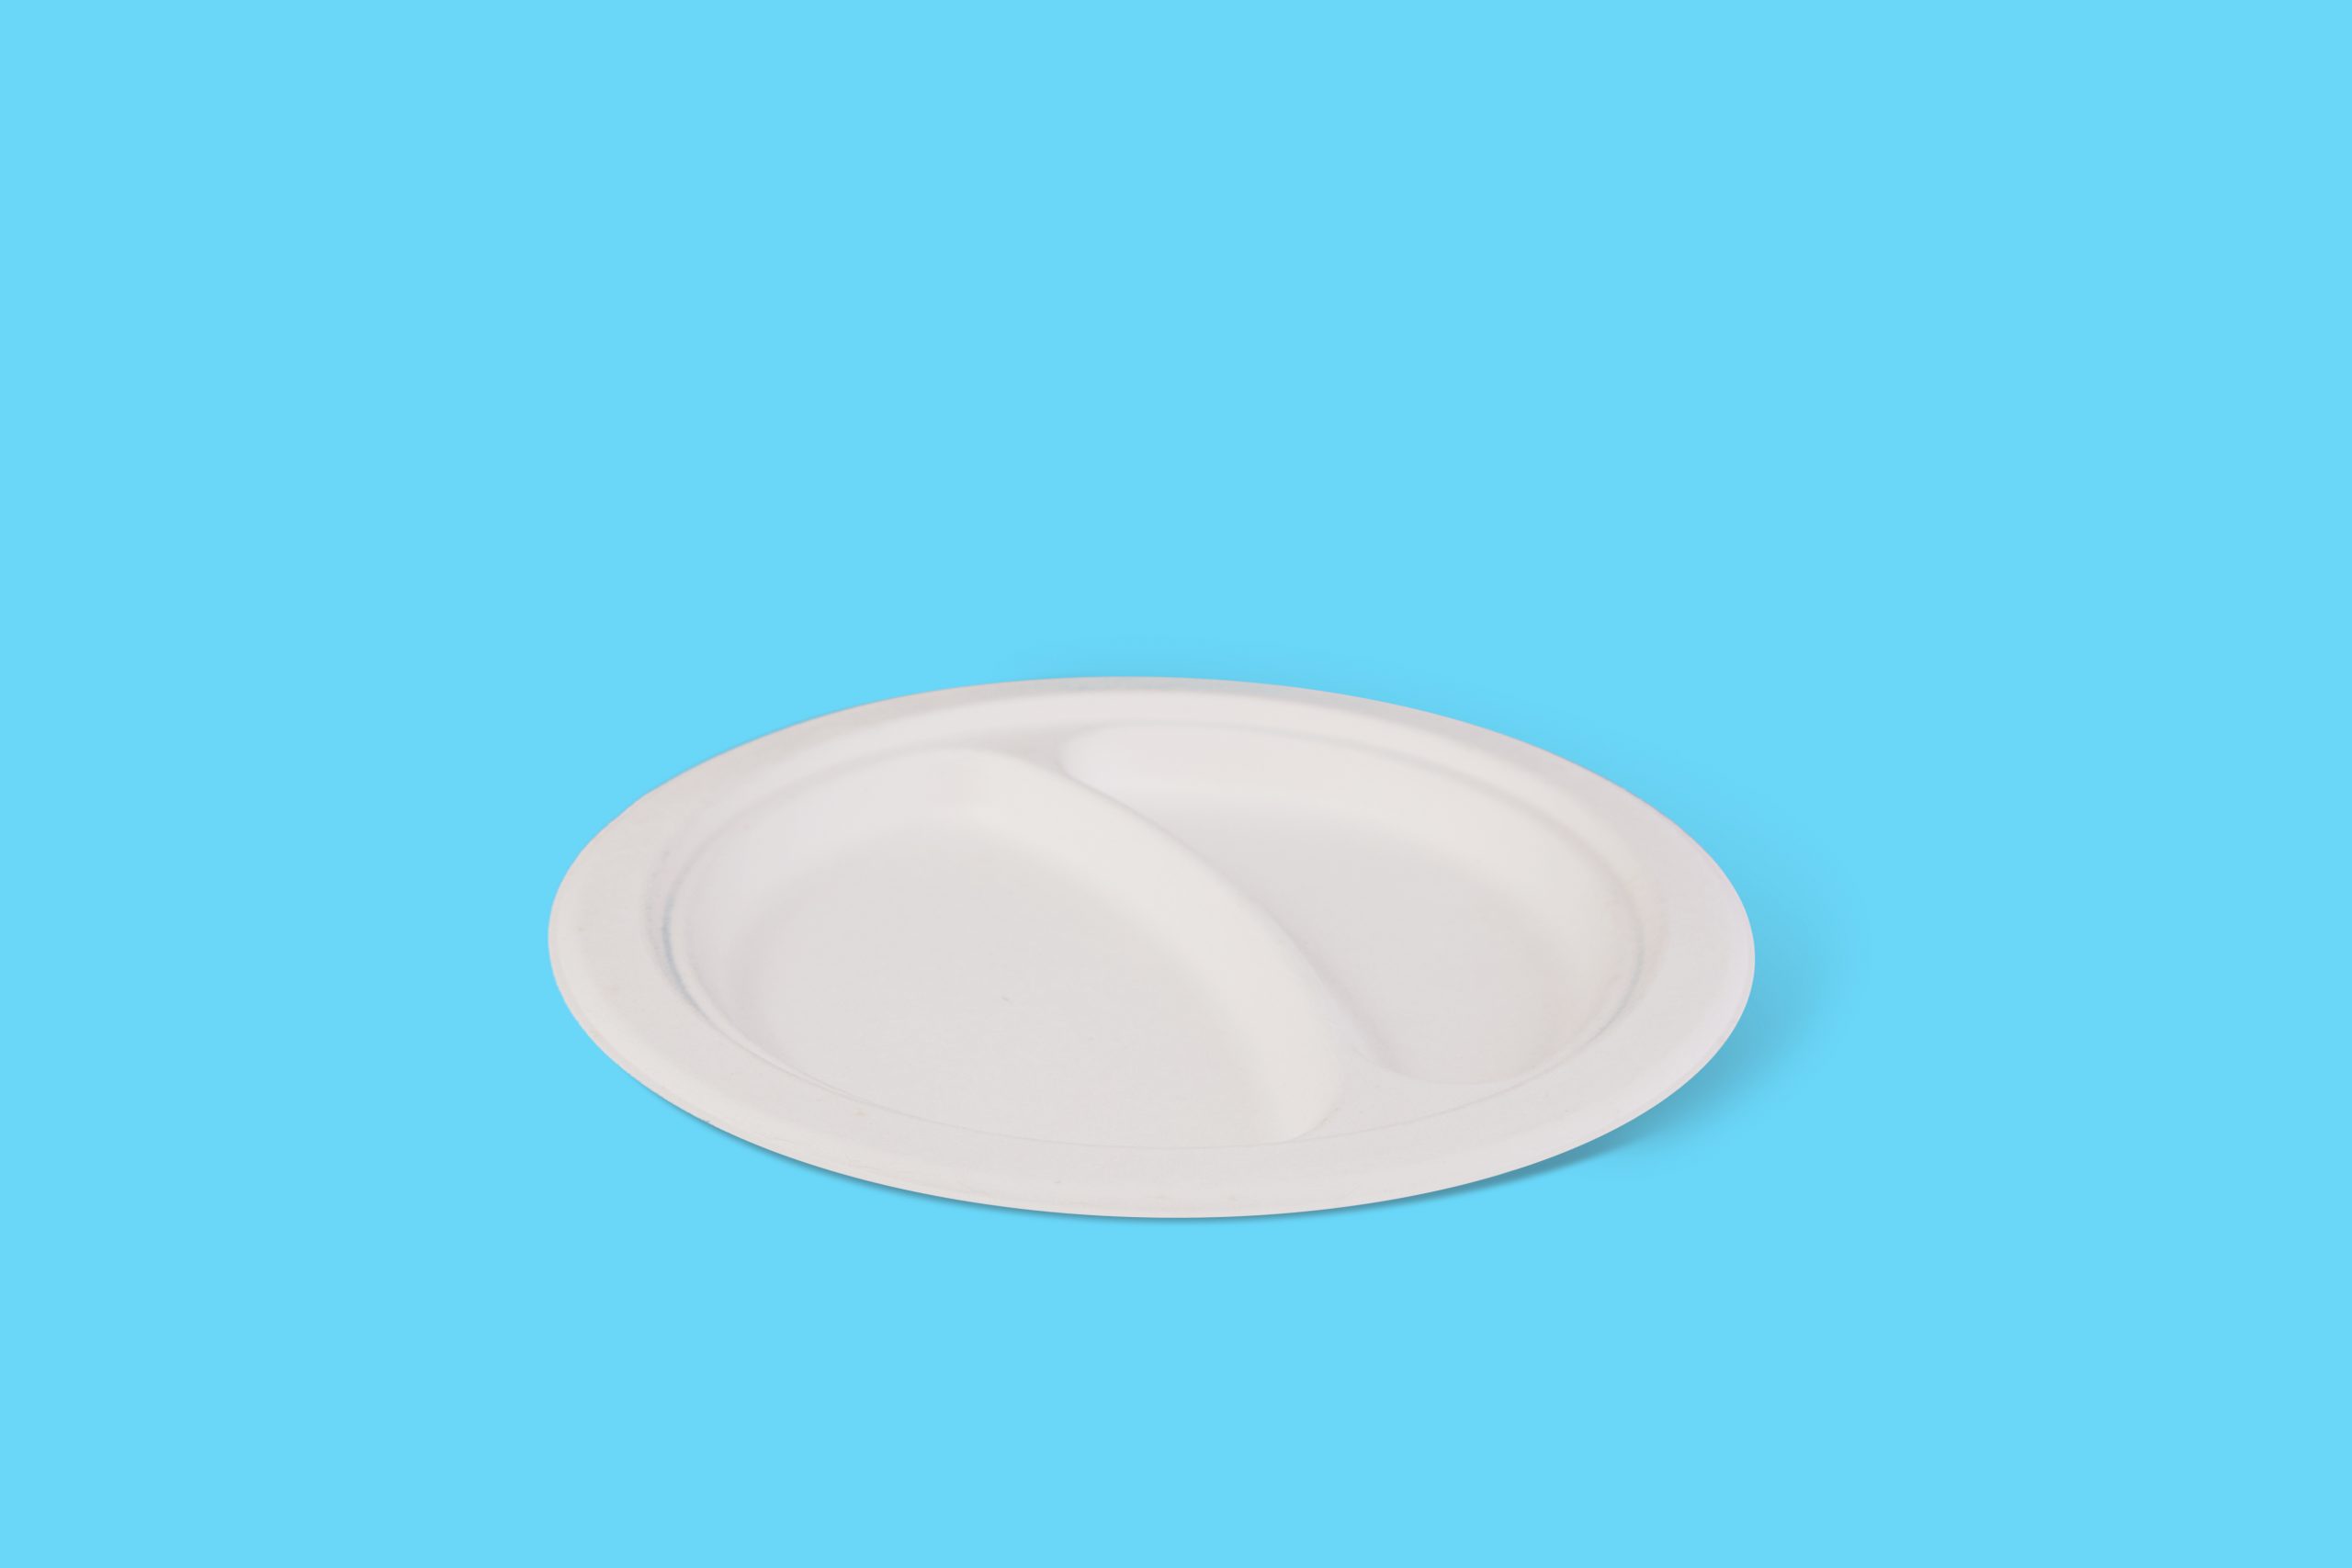 Disposable plates | Bio Futura - Sustainable packaging & disposables